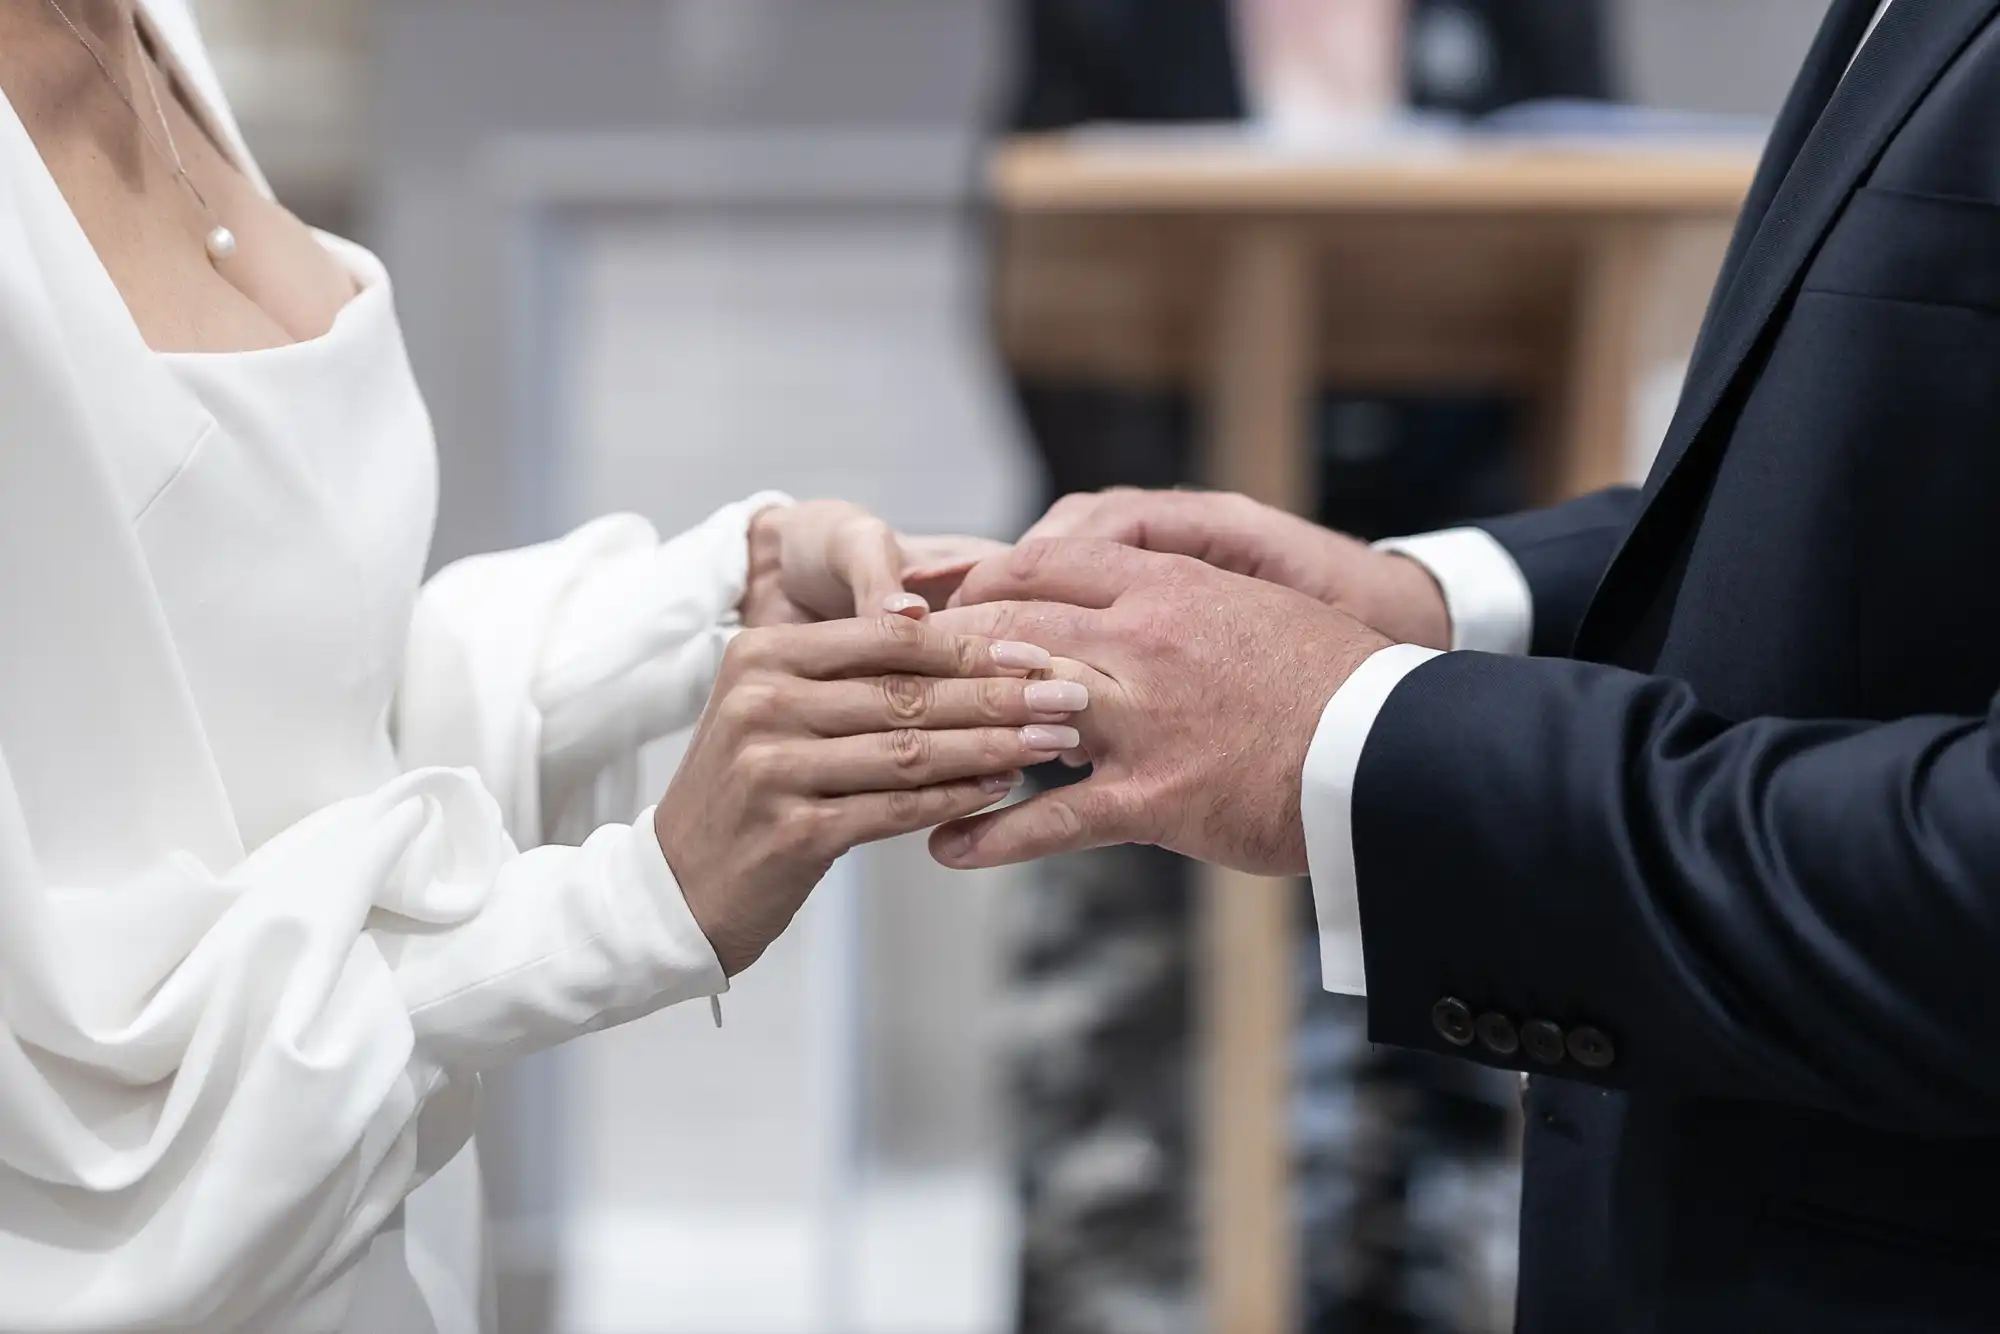 A bride and groom exchange wedding rings, focusing on their hands clasping over a blurred background.